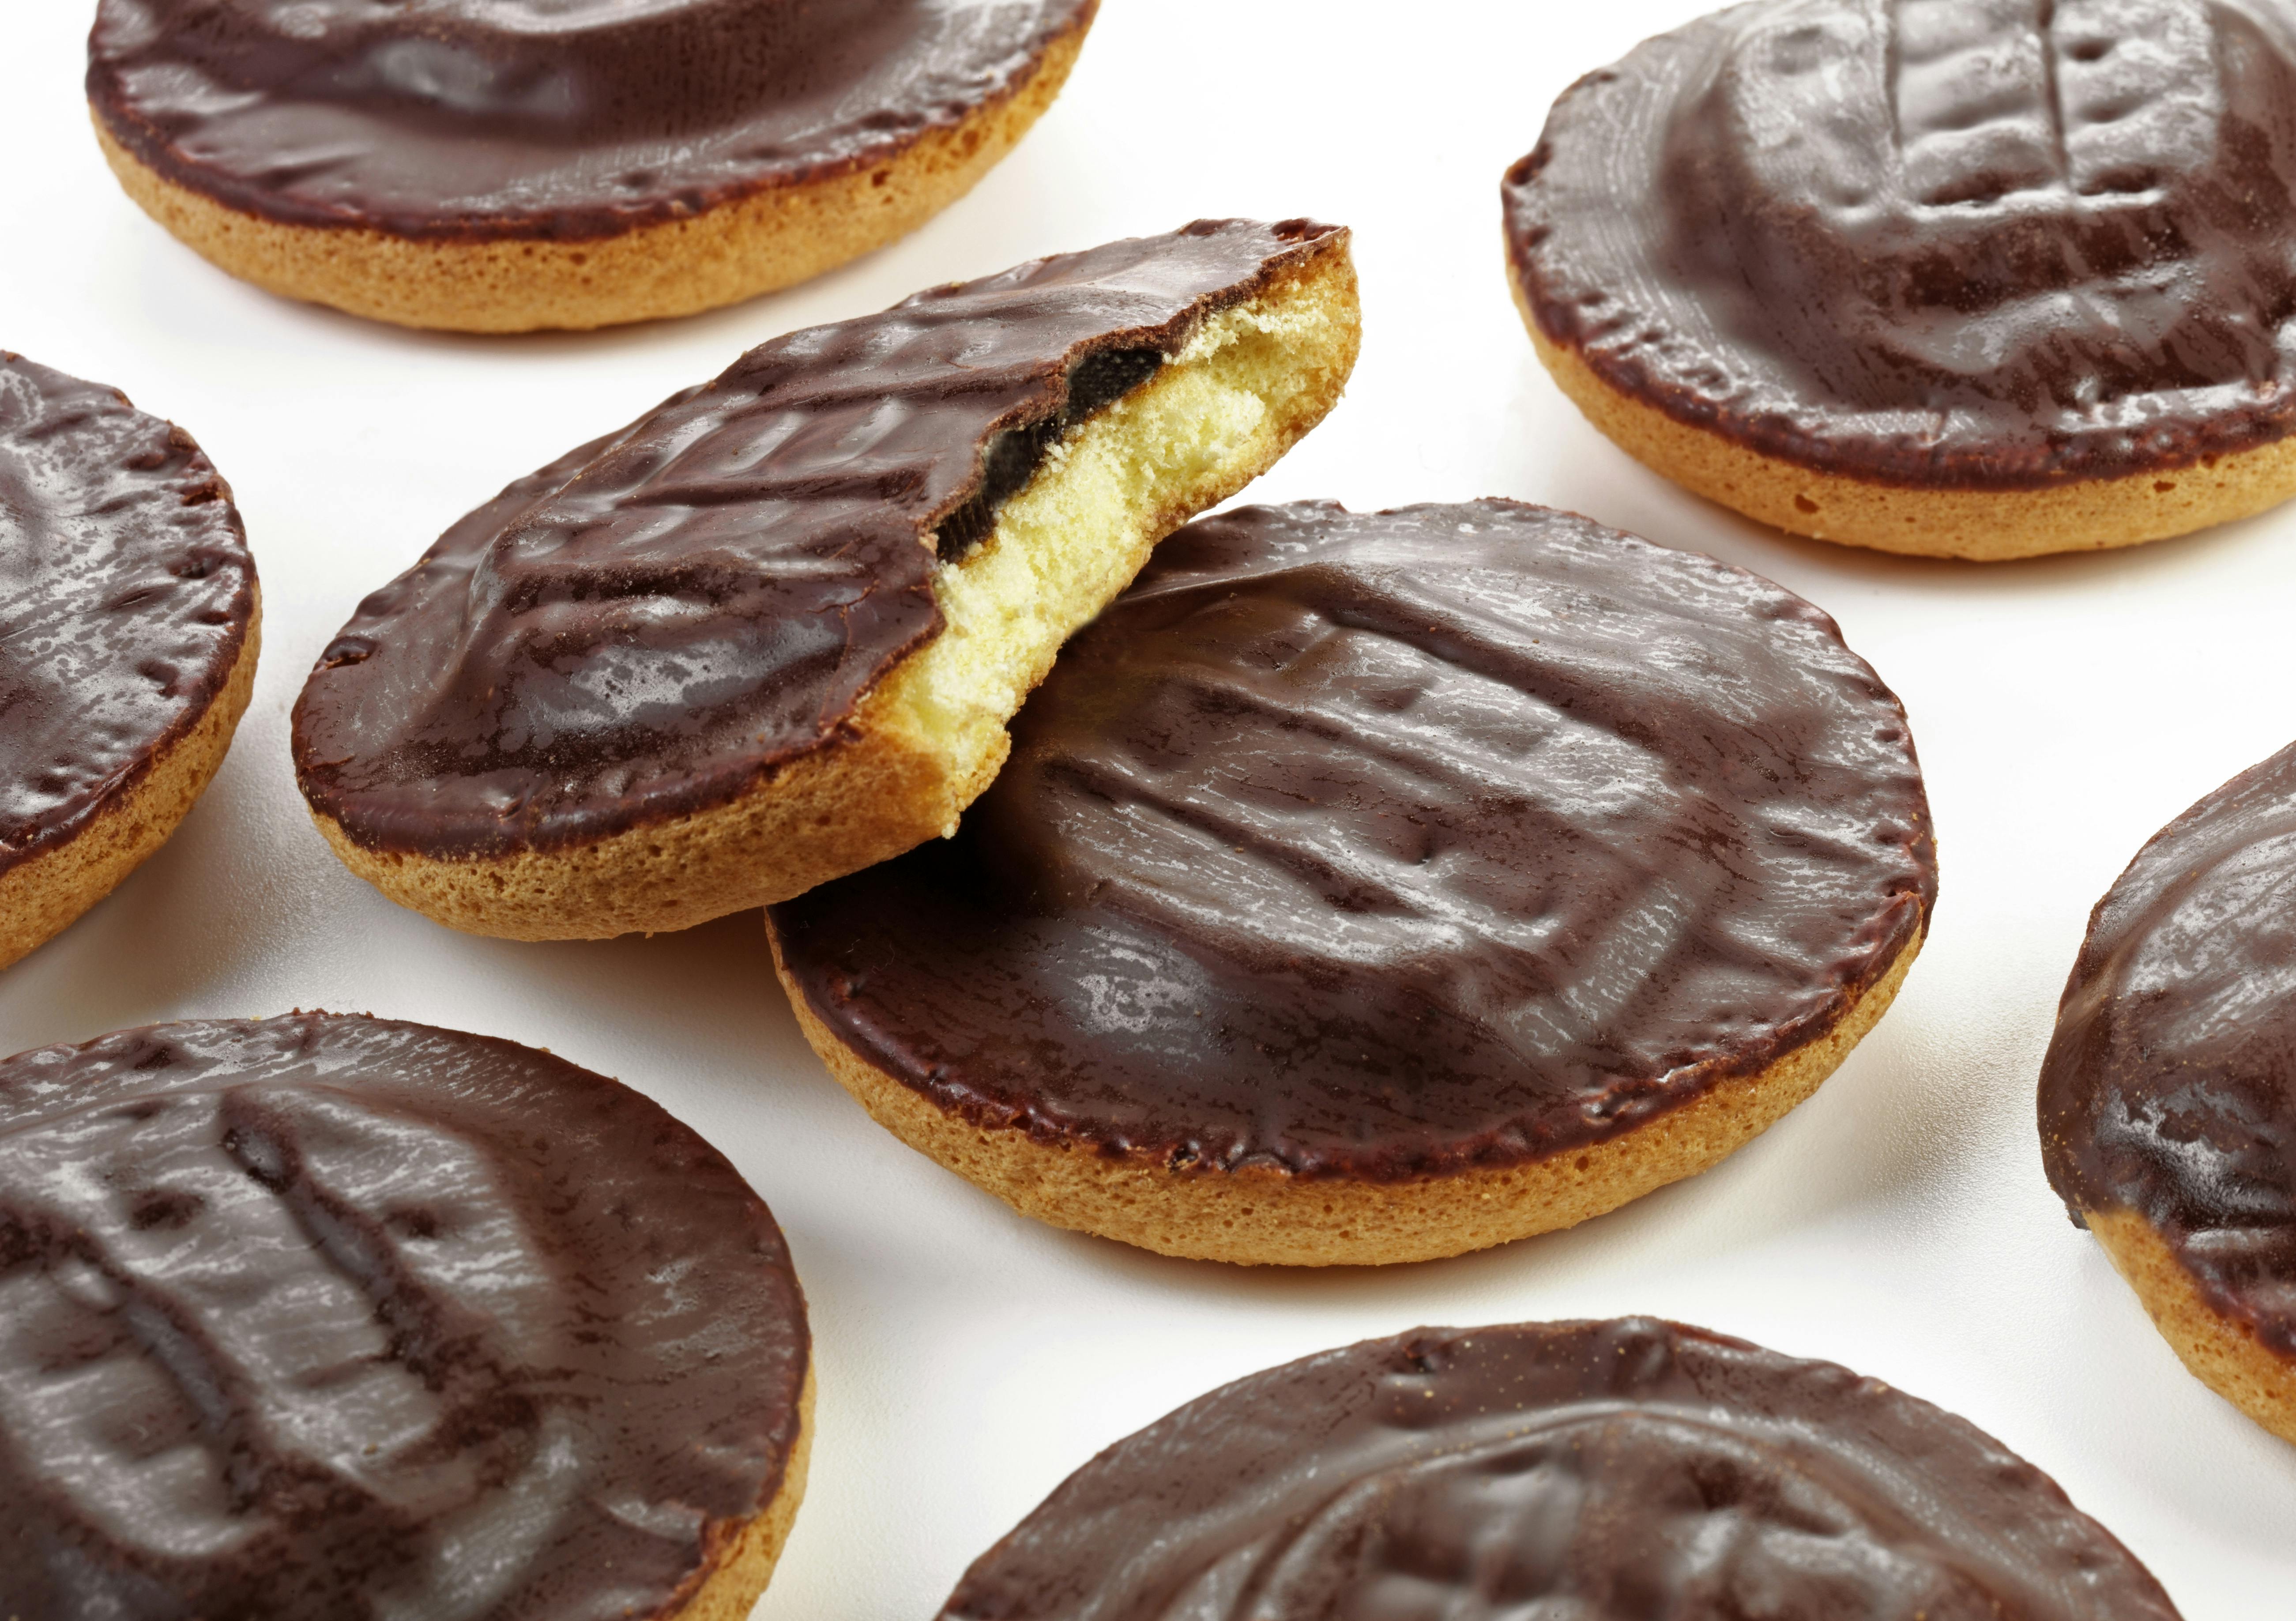 Round Chocolate Jaffa Cake Or Biscuit Cookie Filled With Natural Jam Stock  Photo - Download Image Now - iStock